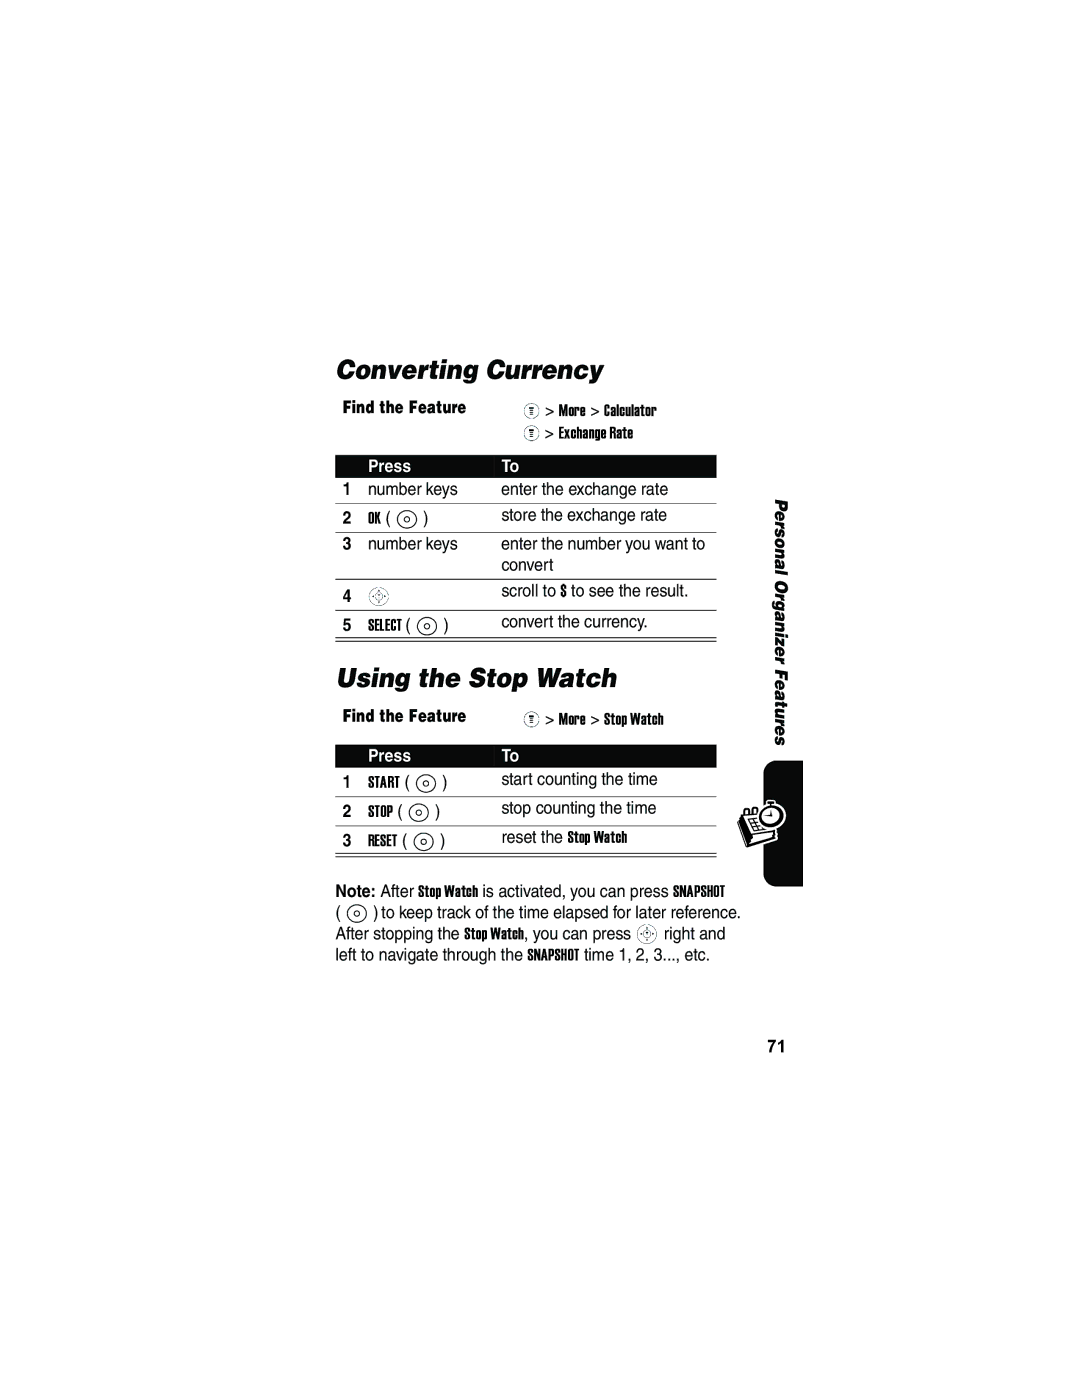 Motorola V173 manual Converting Currency, Using the Stop Watch 